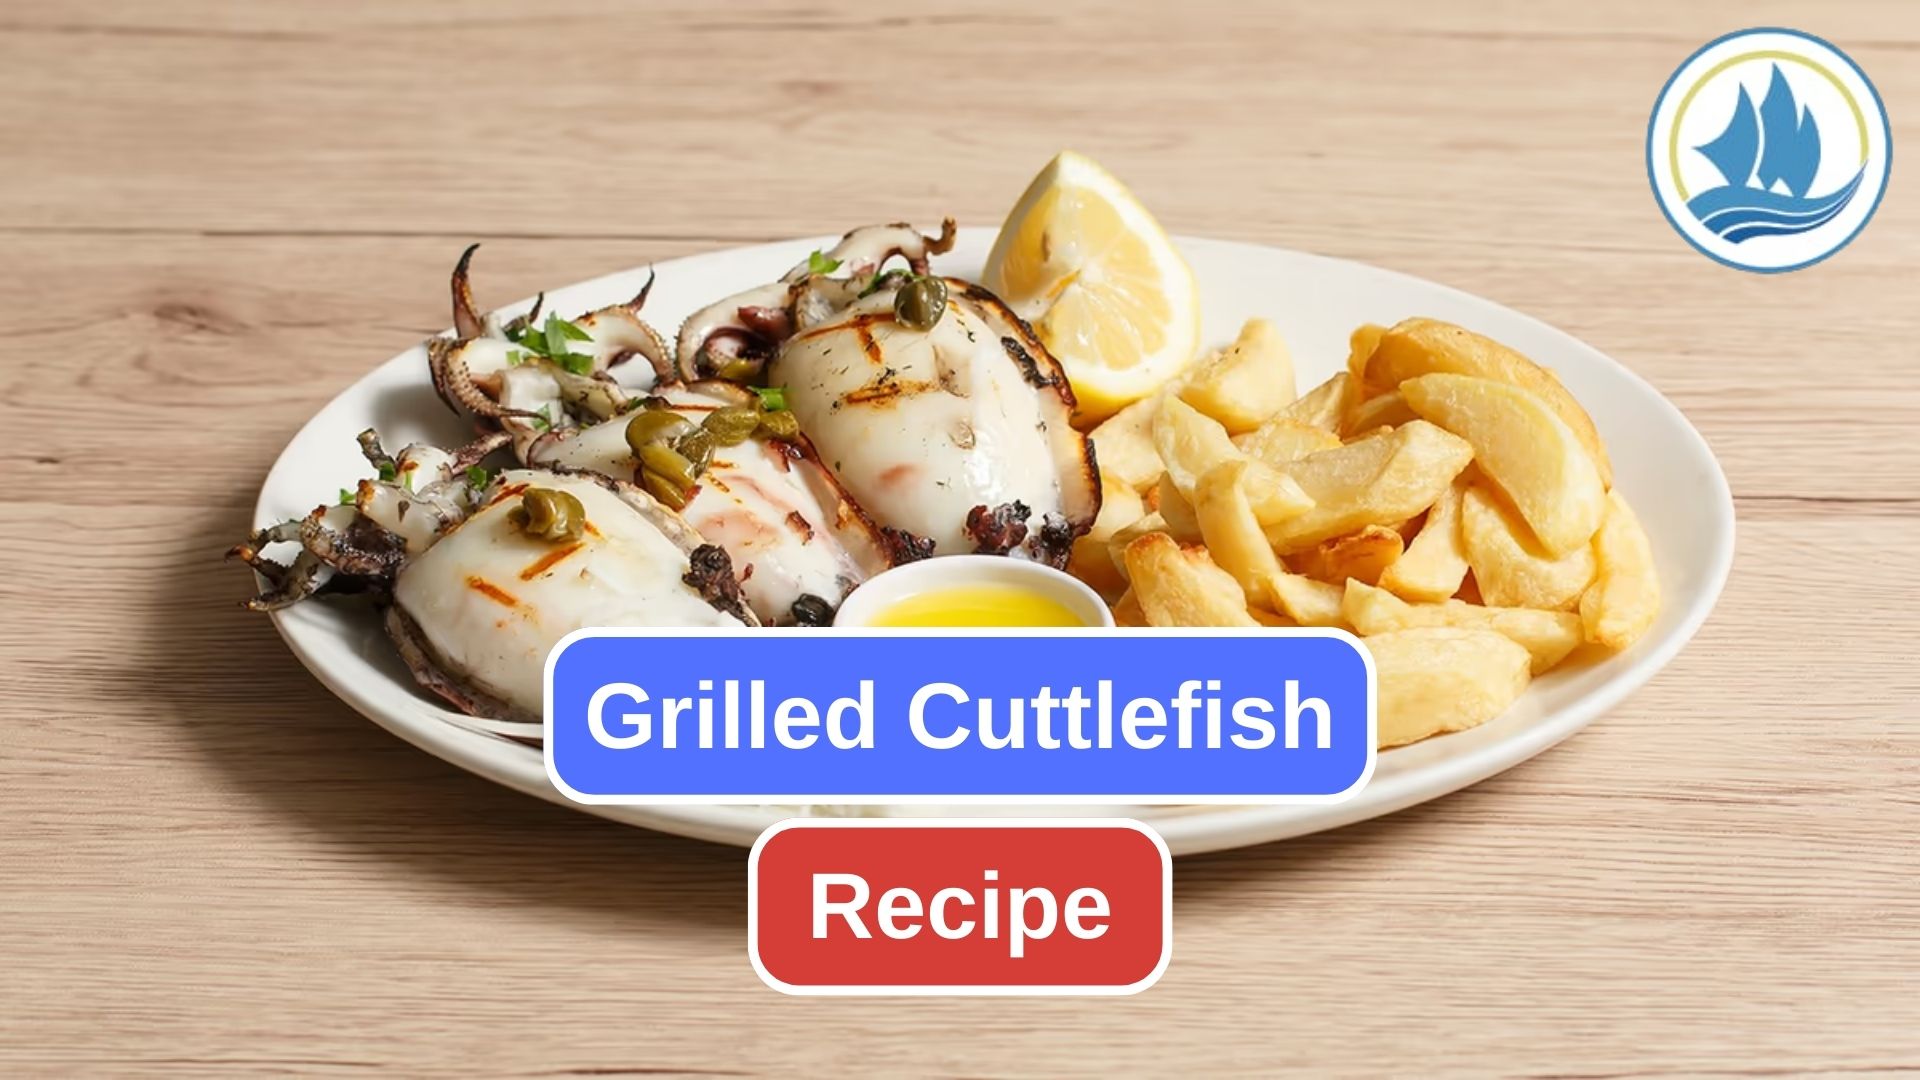 A Perfect Recipe of Grilled Cuttlefish